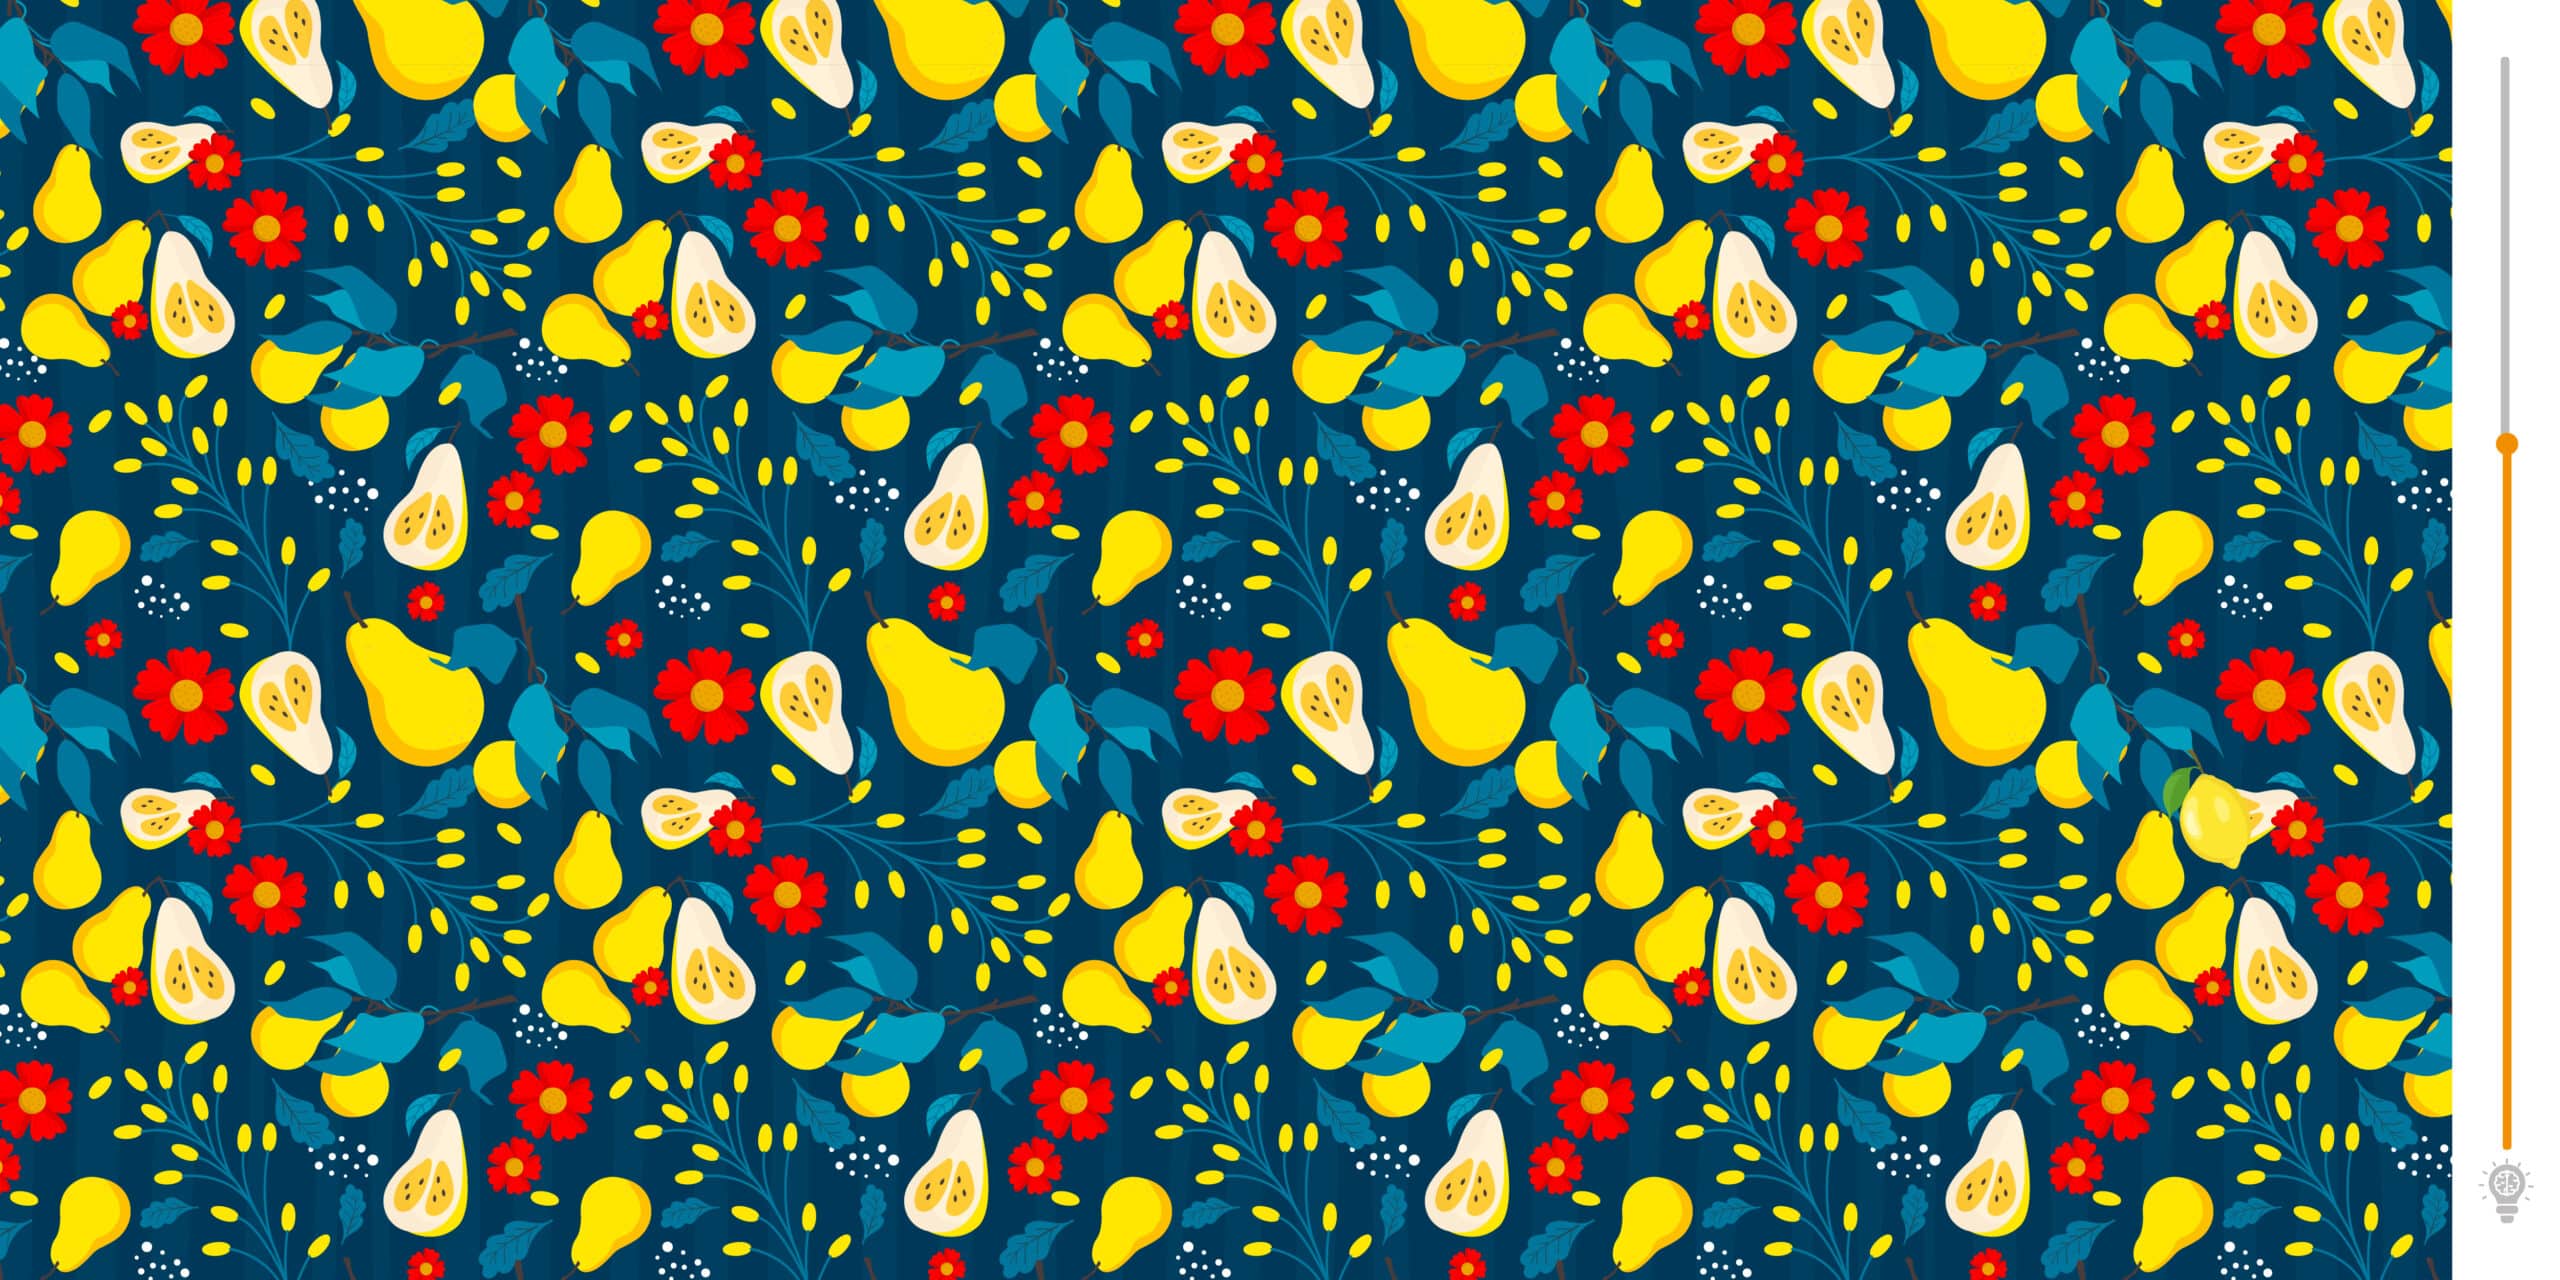 Visual test: Can you find the lemon among these fruits?